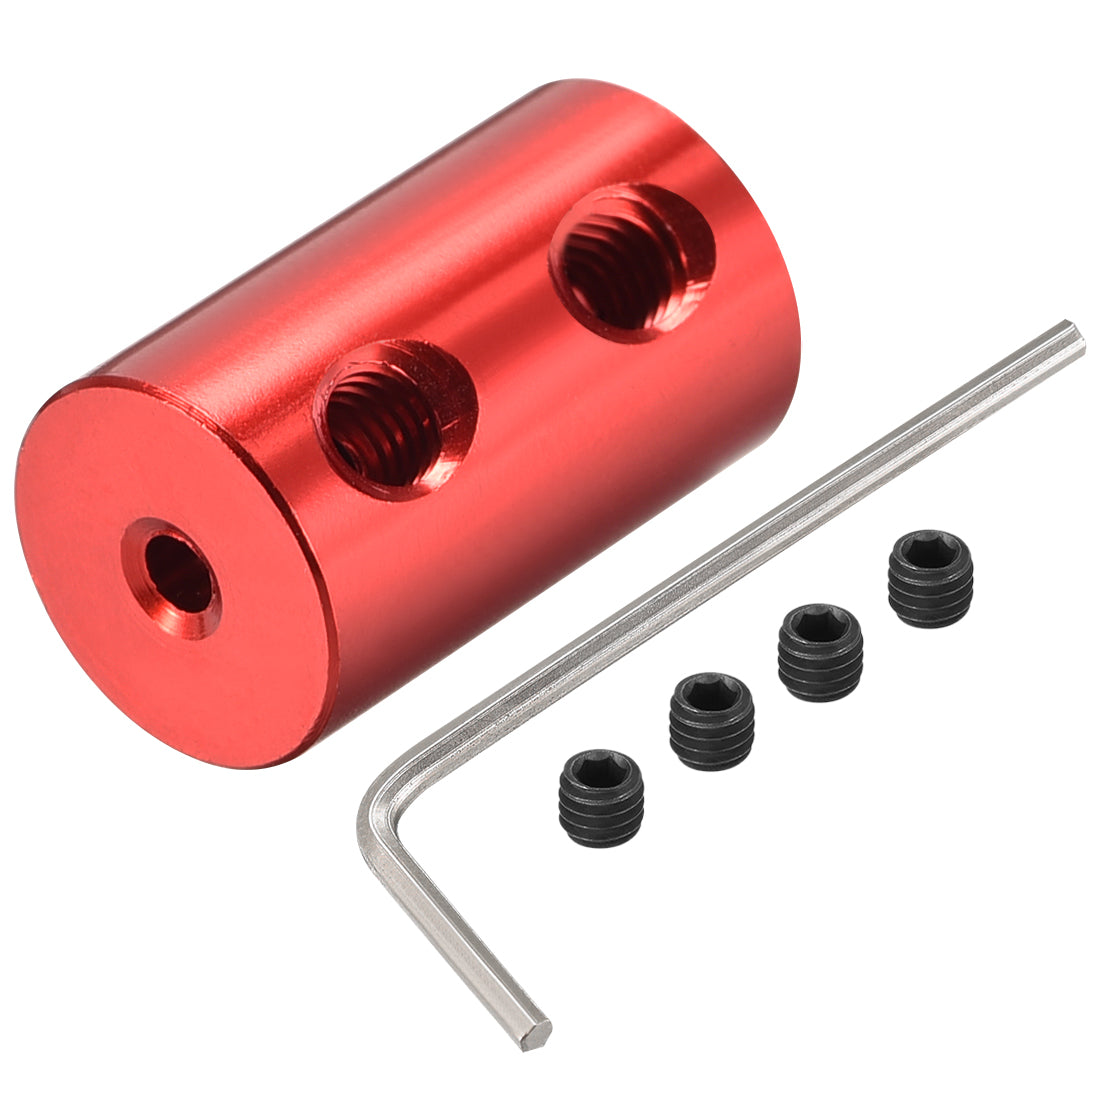 Uxcell Uxcell 3mm to 3.17mm Bore Rigid Coupling 20mm Length 12mm Diameter Aluminum Alloy Shaft Coupler Connector Red 2pcs